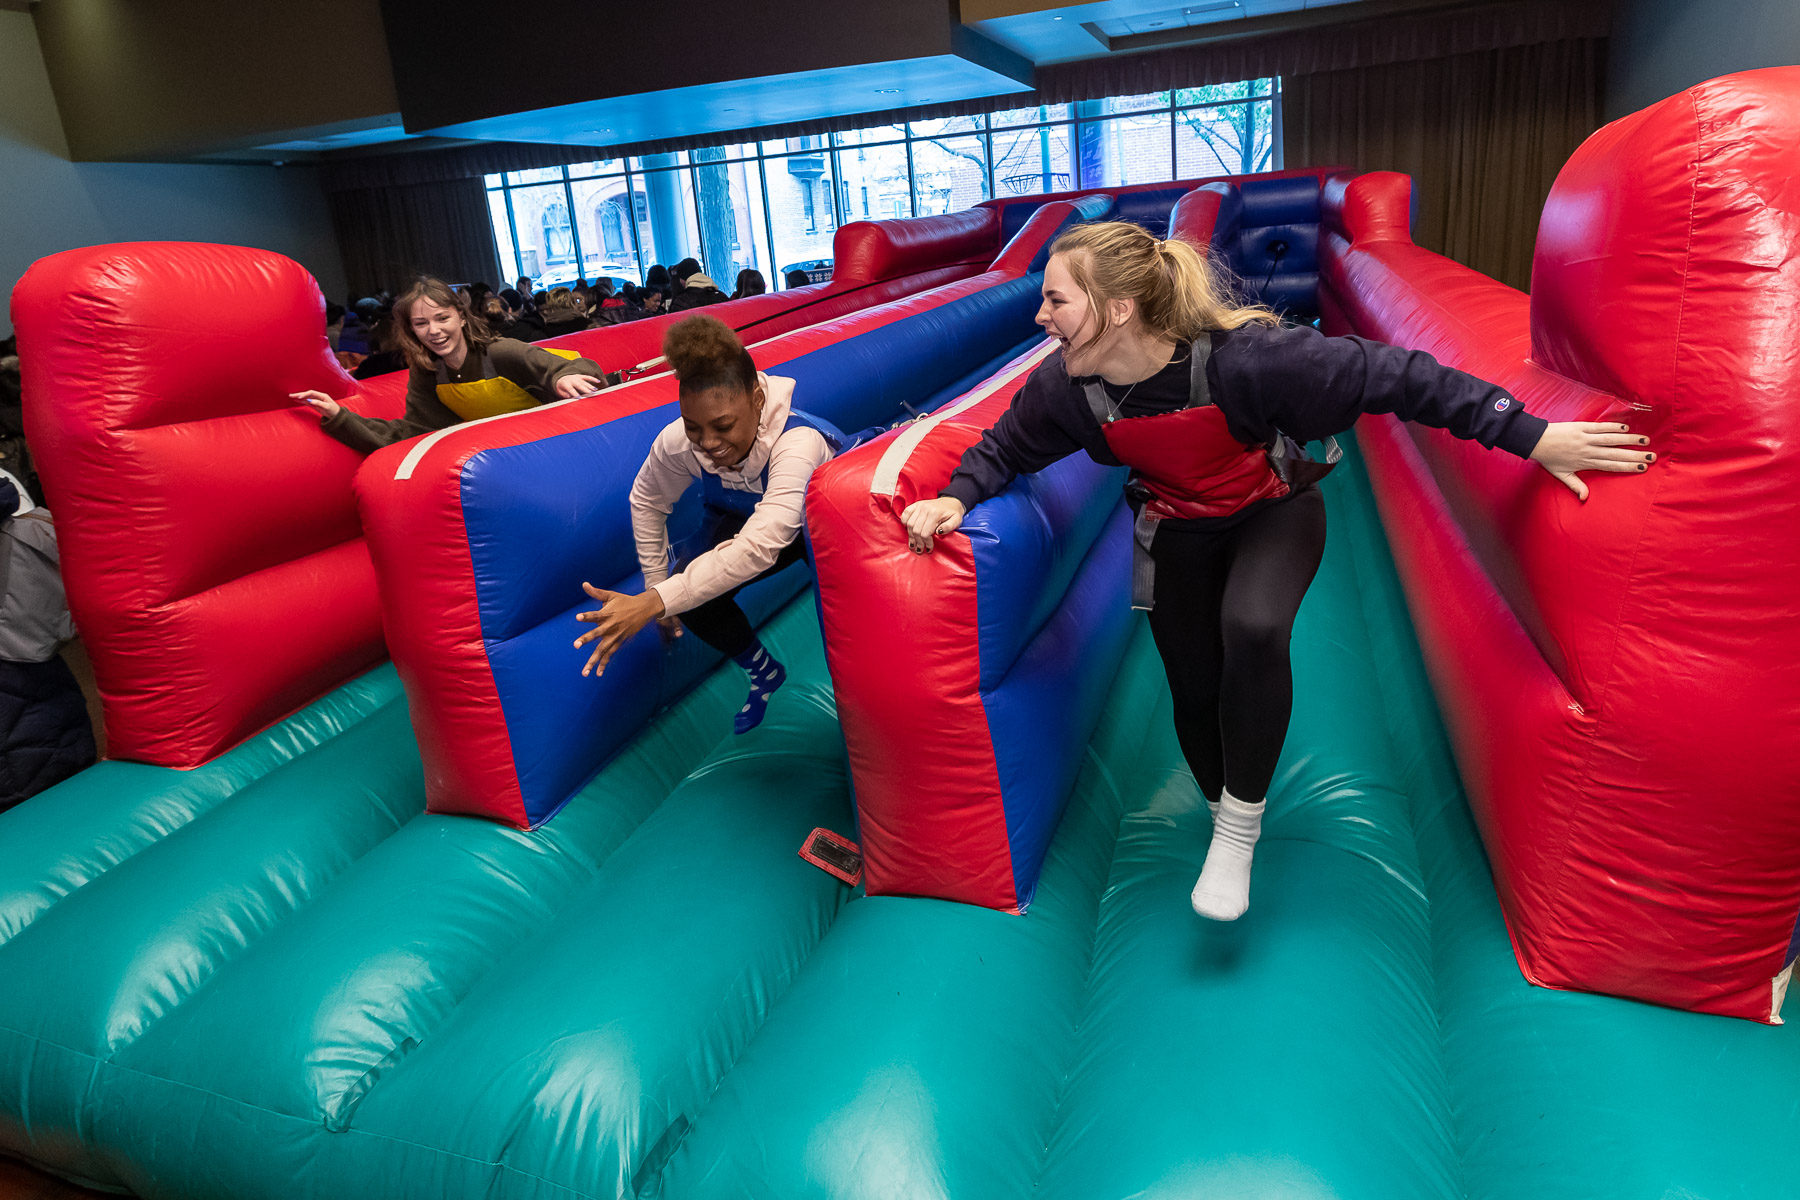 Students attempt to run against tethered harnesses in an inflatable bounce attraction in the Student Center. (DePaul University/Jeff Carrion)